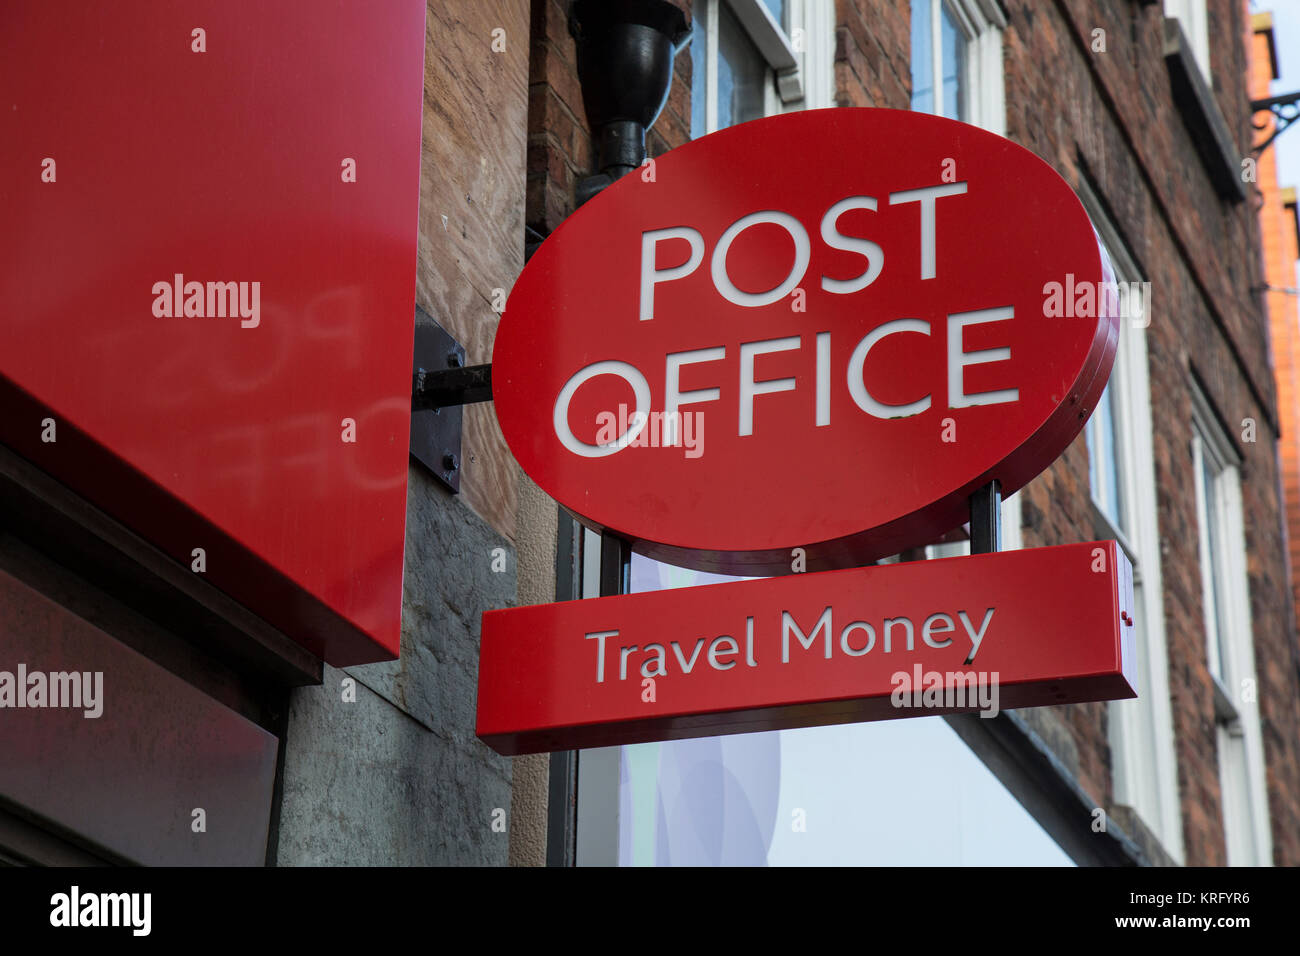 Post Office Travel Money sign outside a Post Office in Shrewsbury, England. Stock Photo